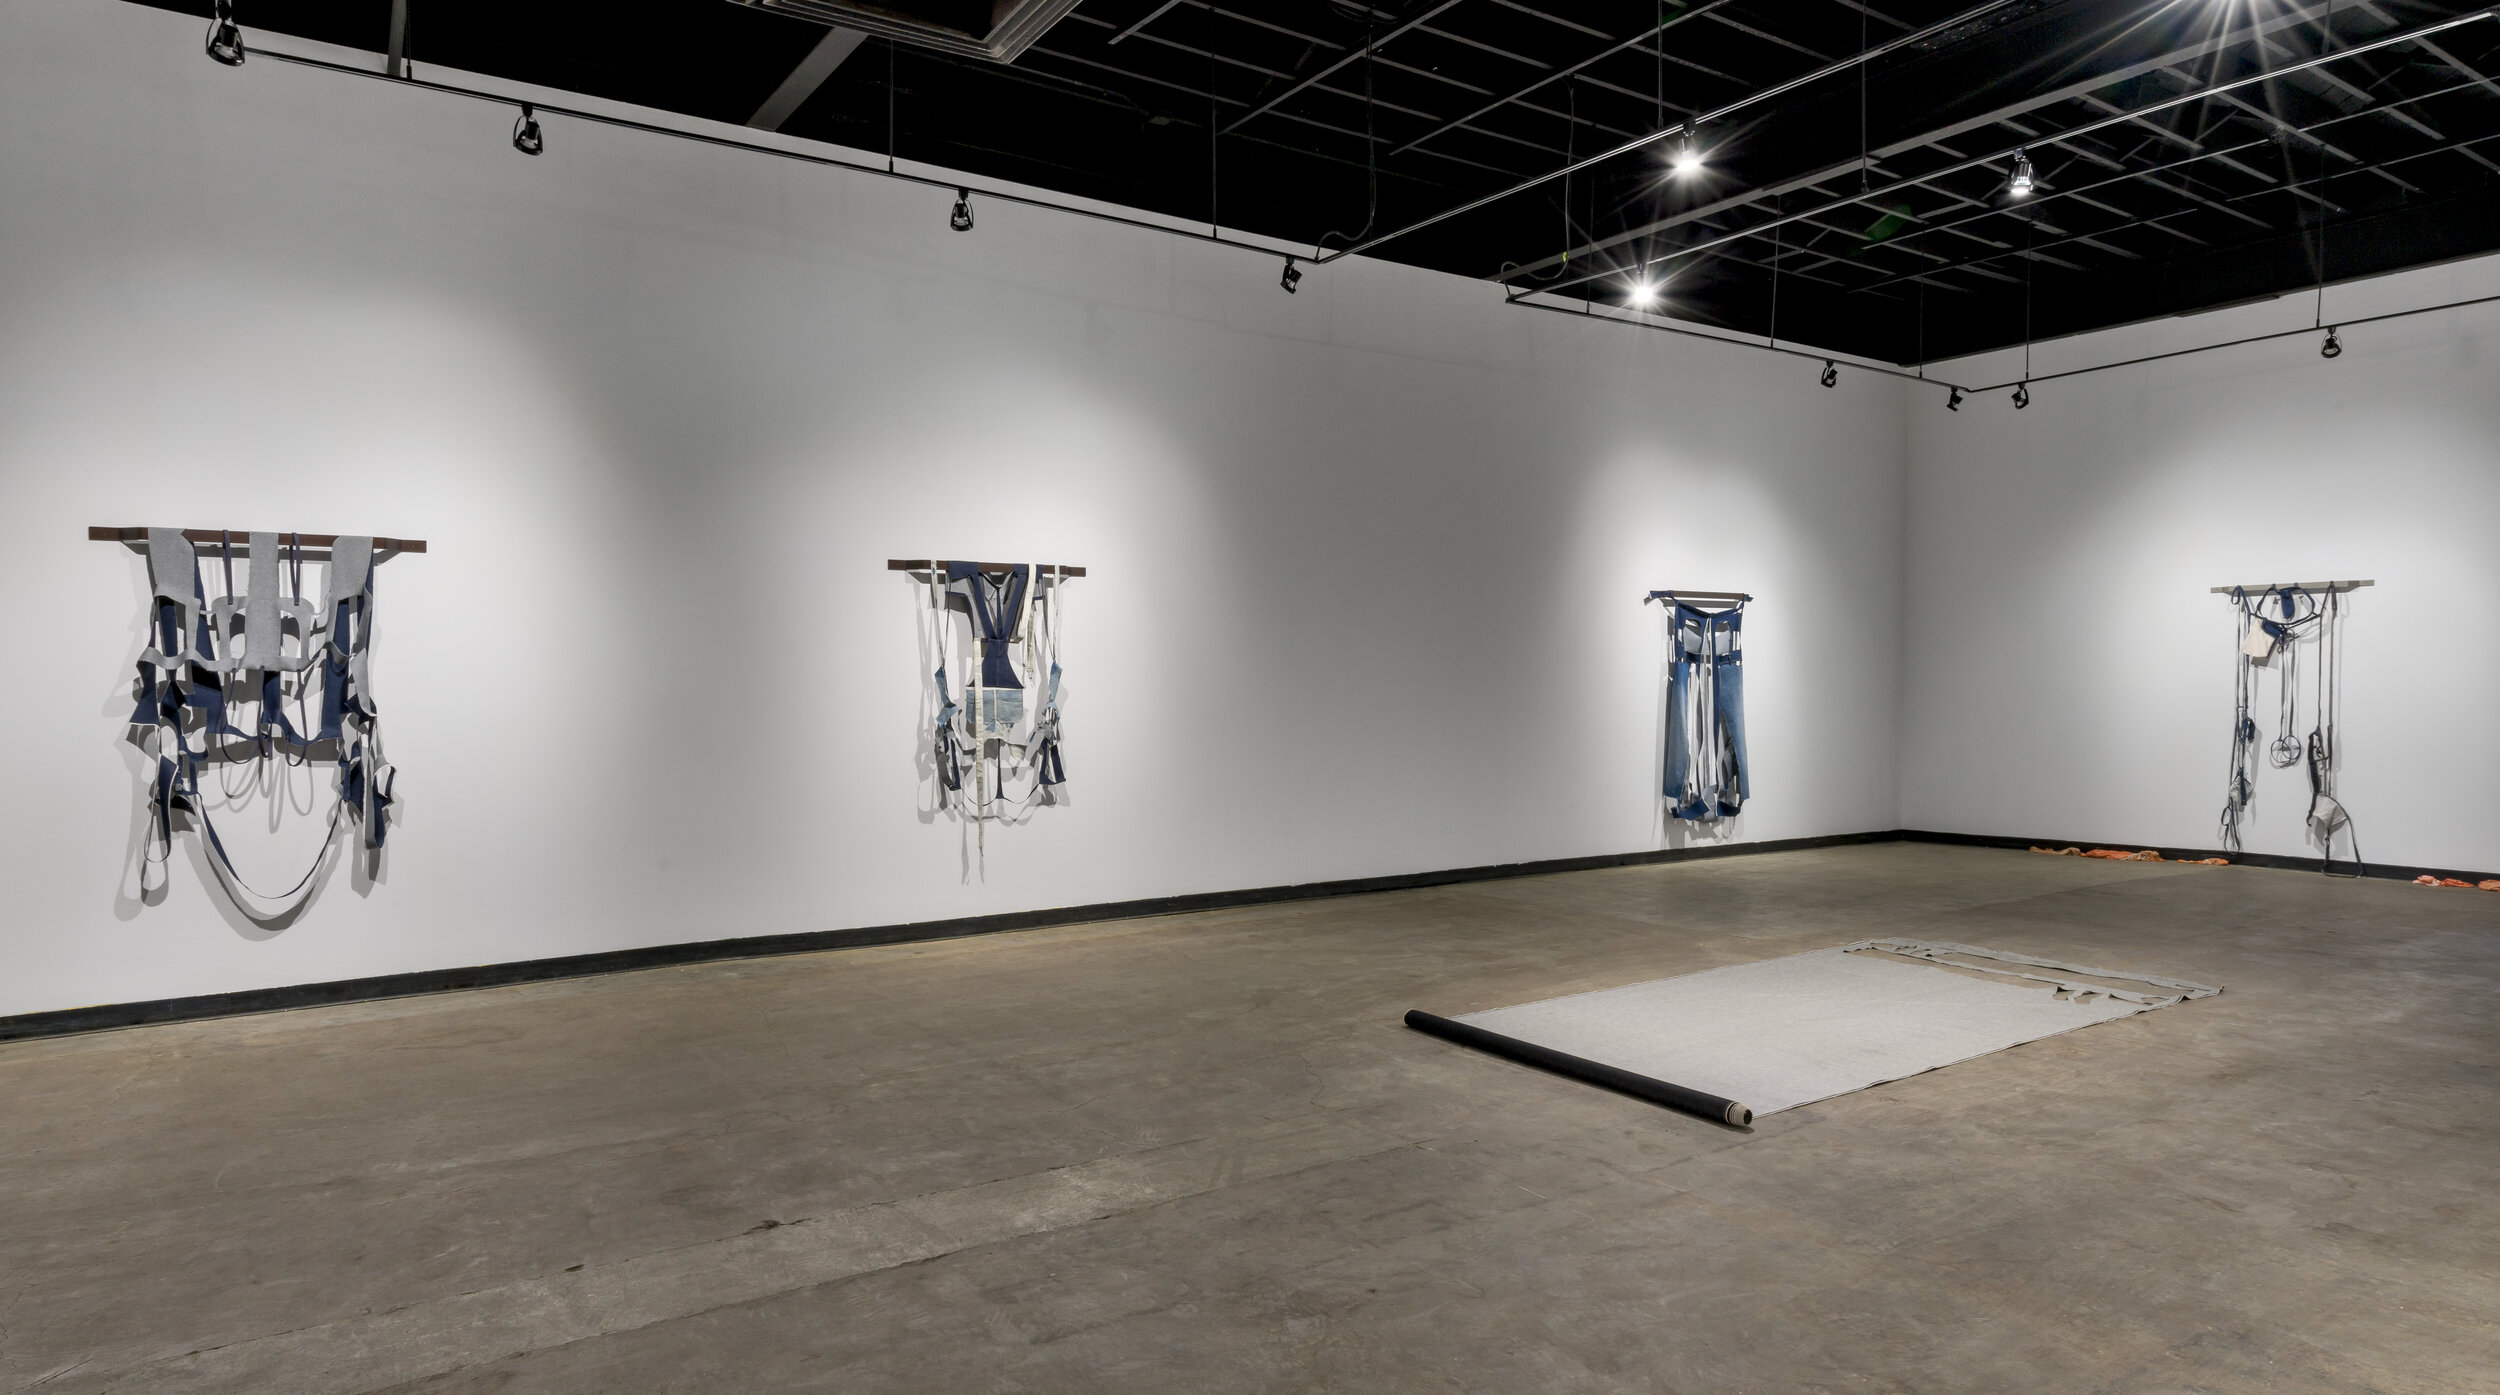  This is a wide view of the gallery for Karen Kraven’s exhibition, Lull. There are four hanging works on the wall, which look like various denim clothing items that have been deconstructed. There is also a piece that has been rolled out on the floor,